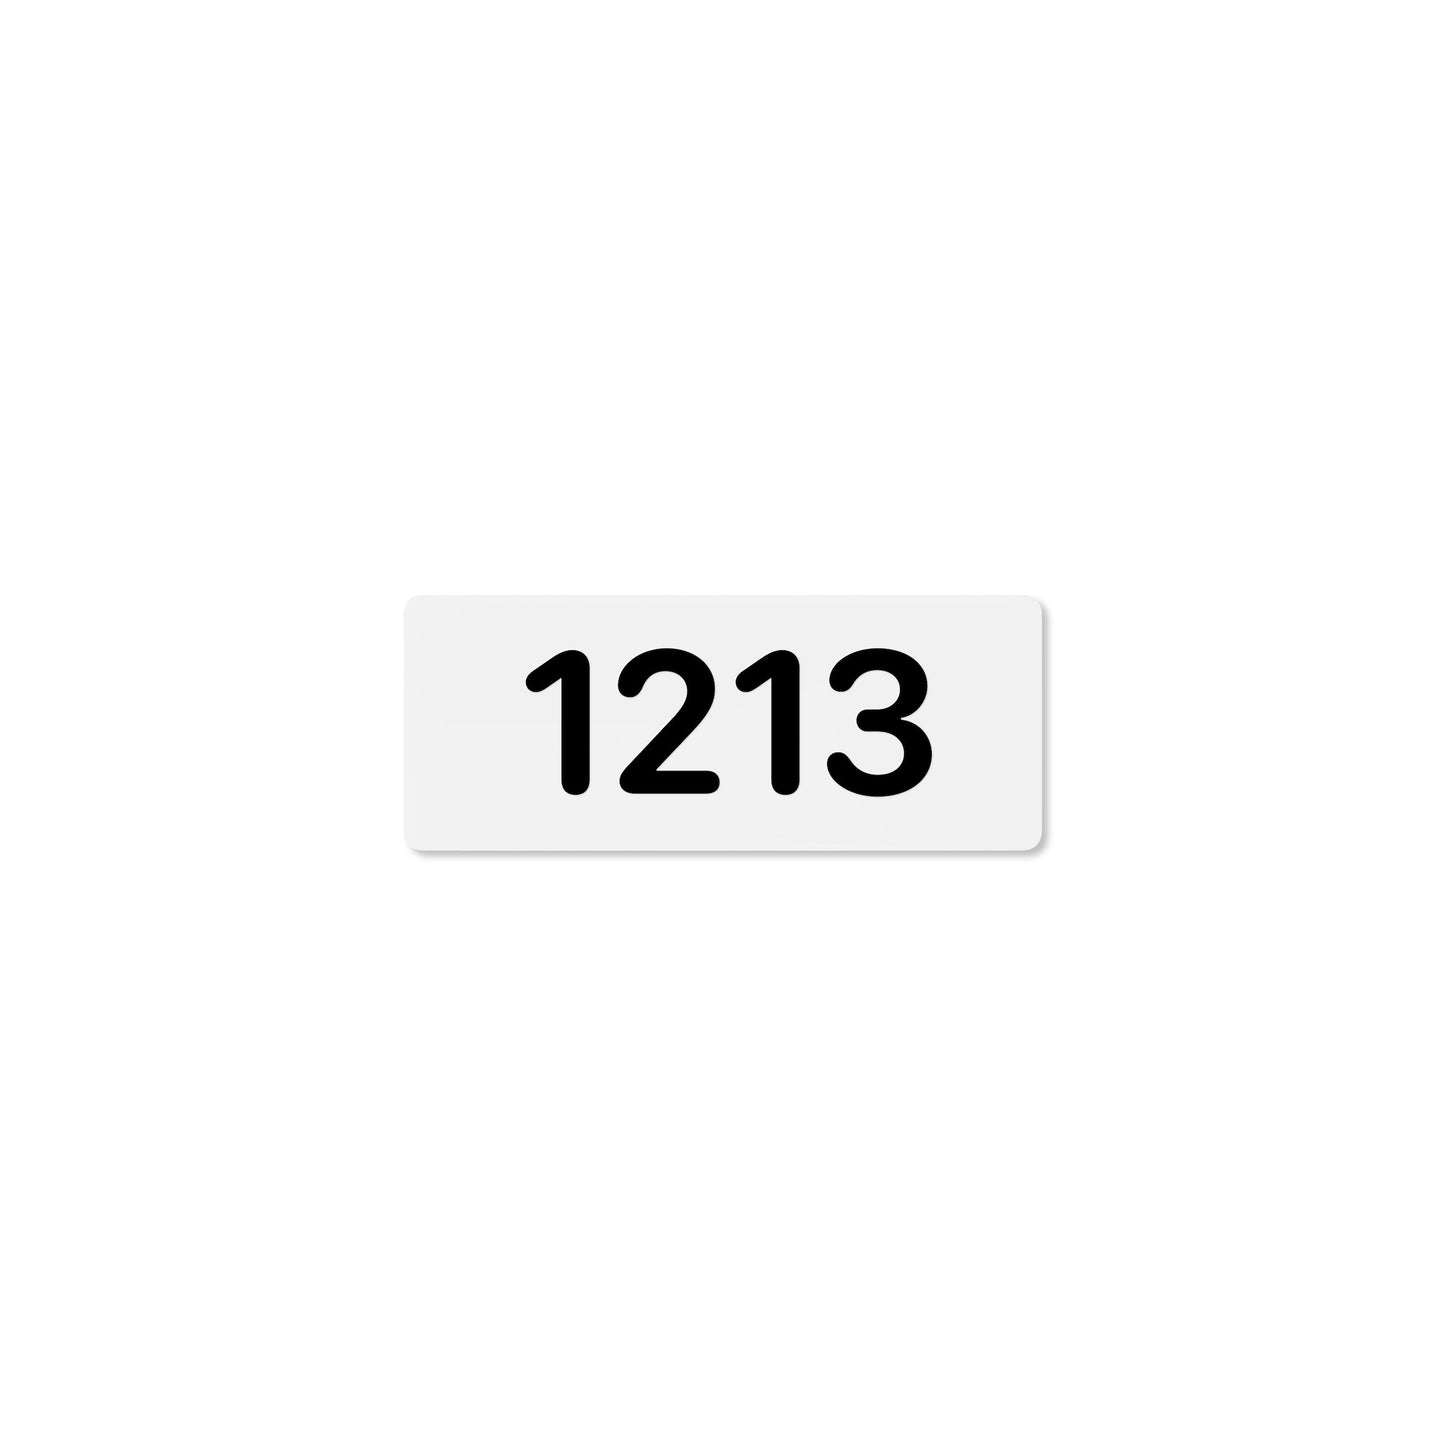 Numeral 1213